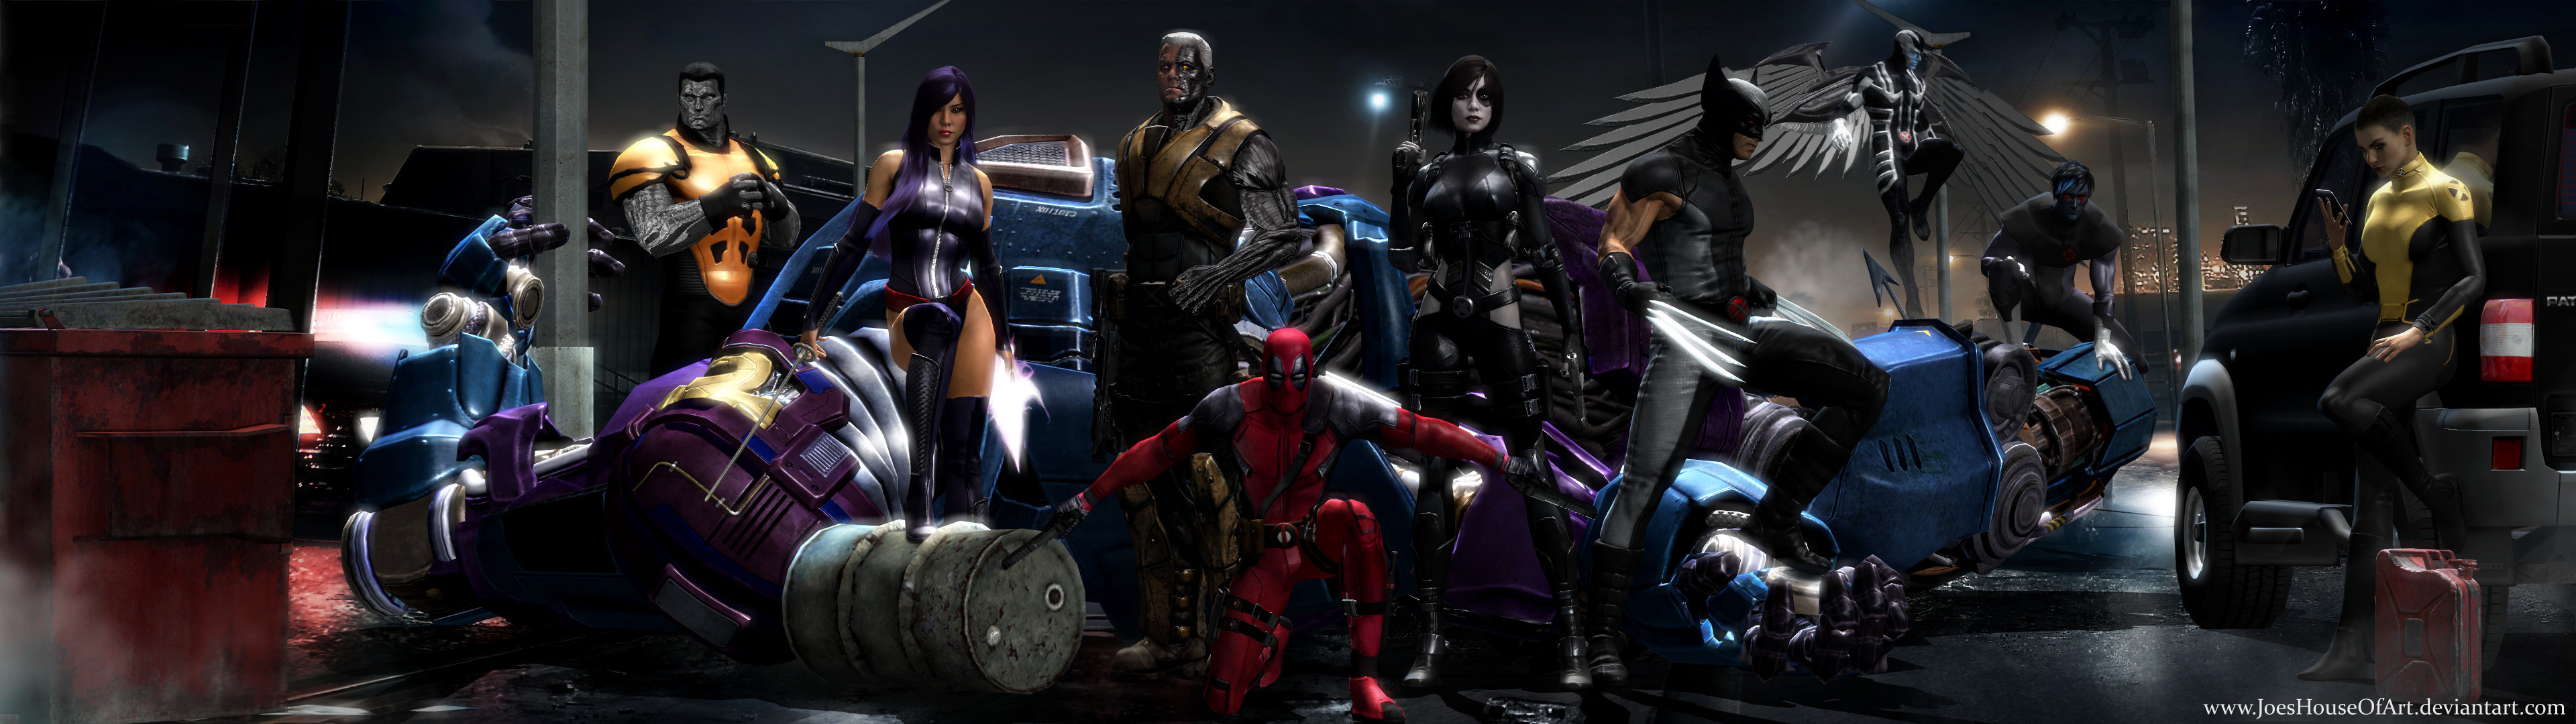 3840x1080 X-Force Movie Dual Screen Wallpaper by ShaunsArtHouse on .